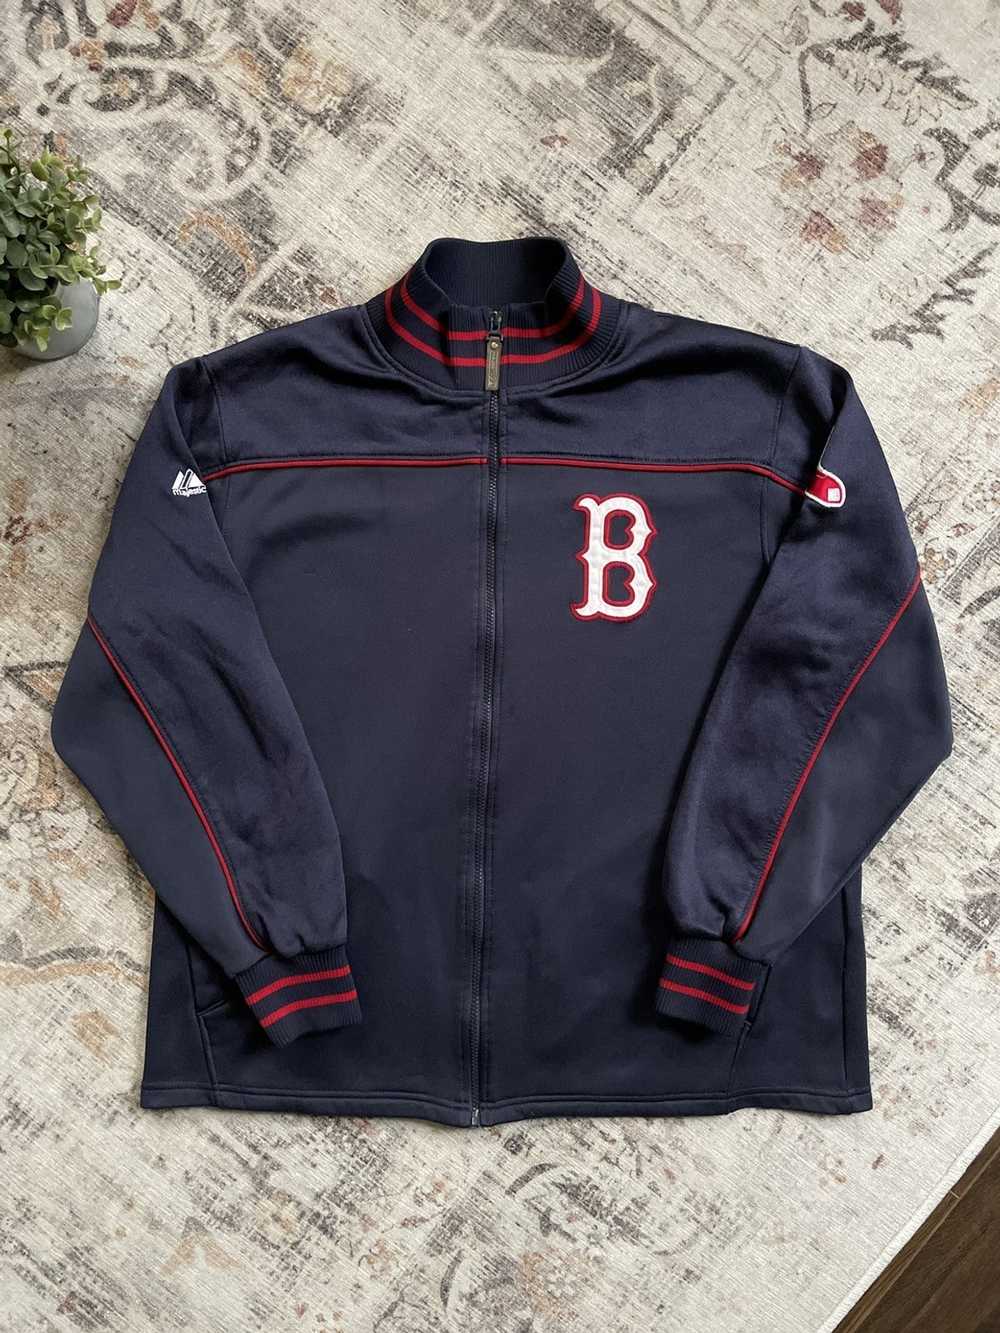 NWT New Womens Majestic Cool Base Boston Red Sox India